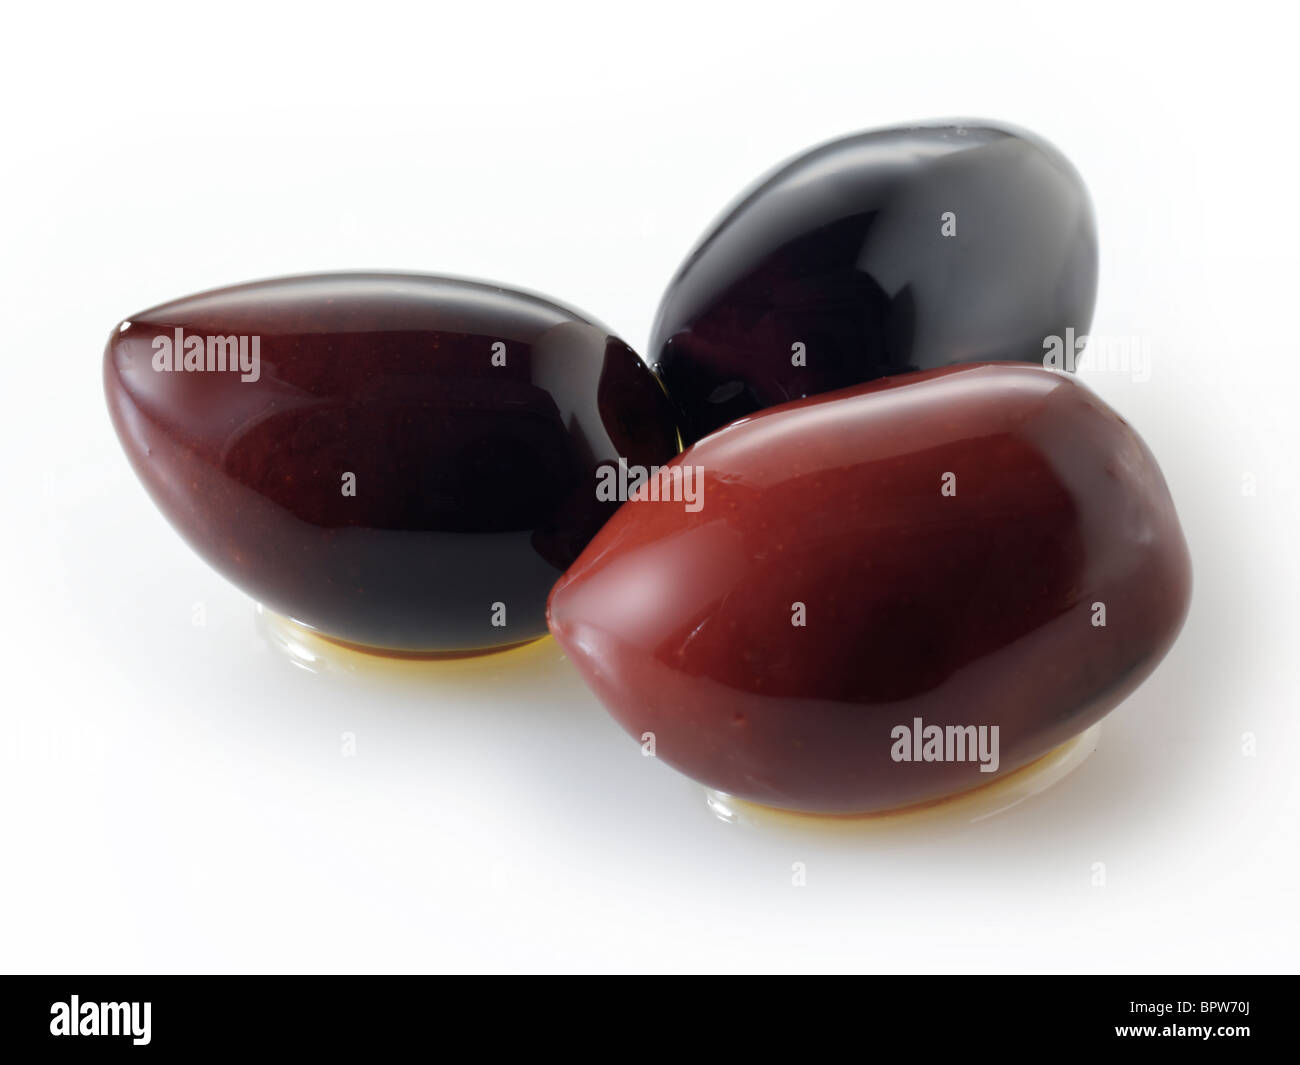 Fresh Kalamata olives photos, pictures & images. Cut out against white background Stock Photo